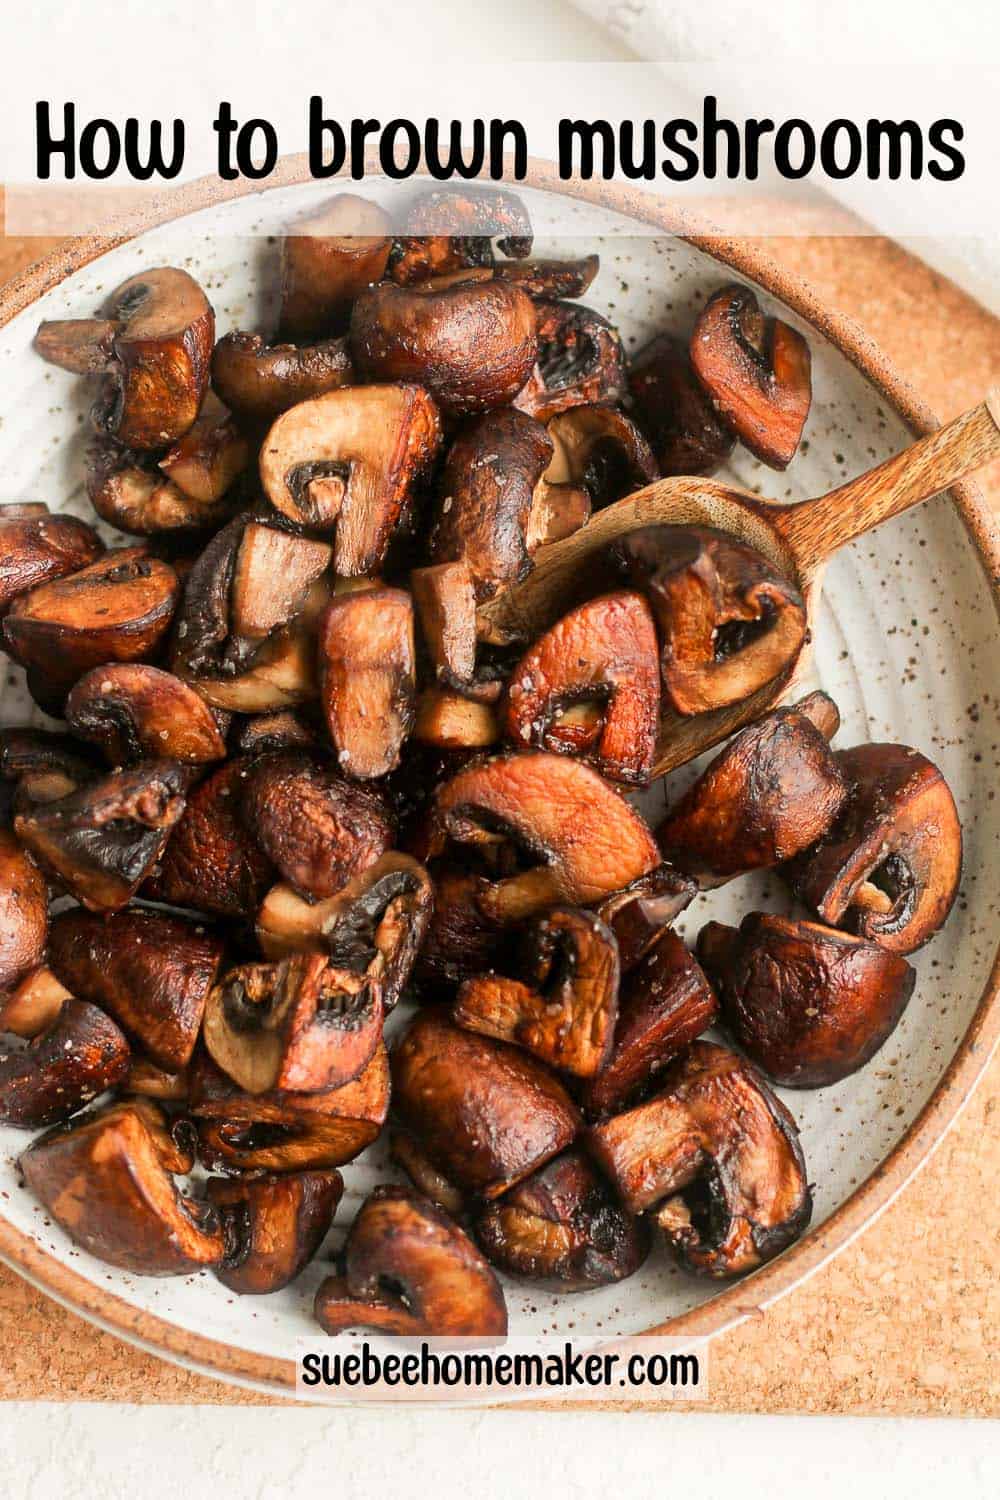 A bowl of browned mushrooms with a wooden spoon.